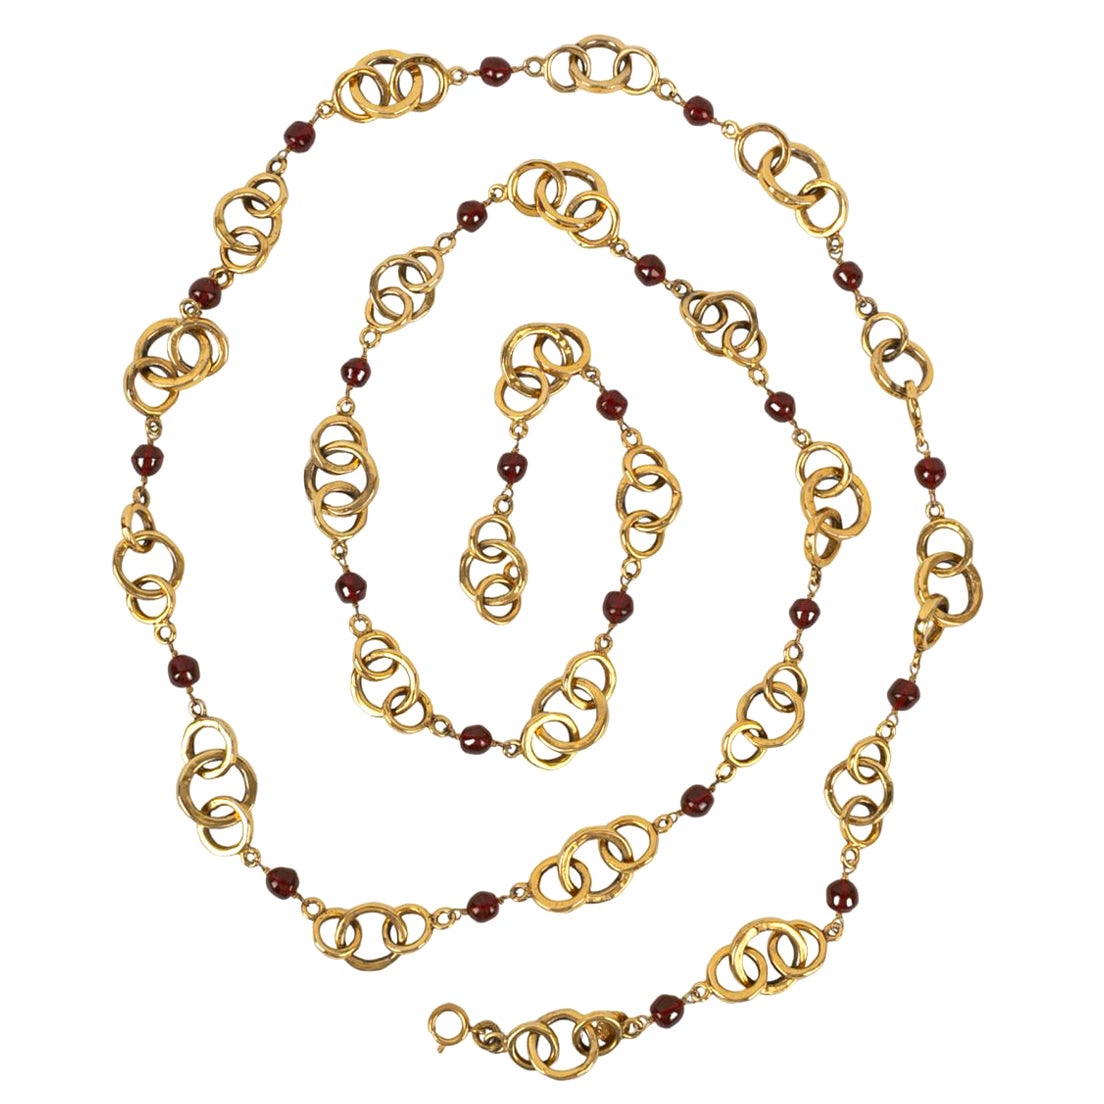 Chanel Long Necklace in Gold Metal and Red Glass Beads, 1984 For Sale